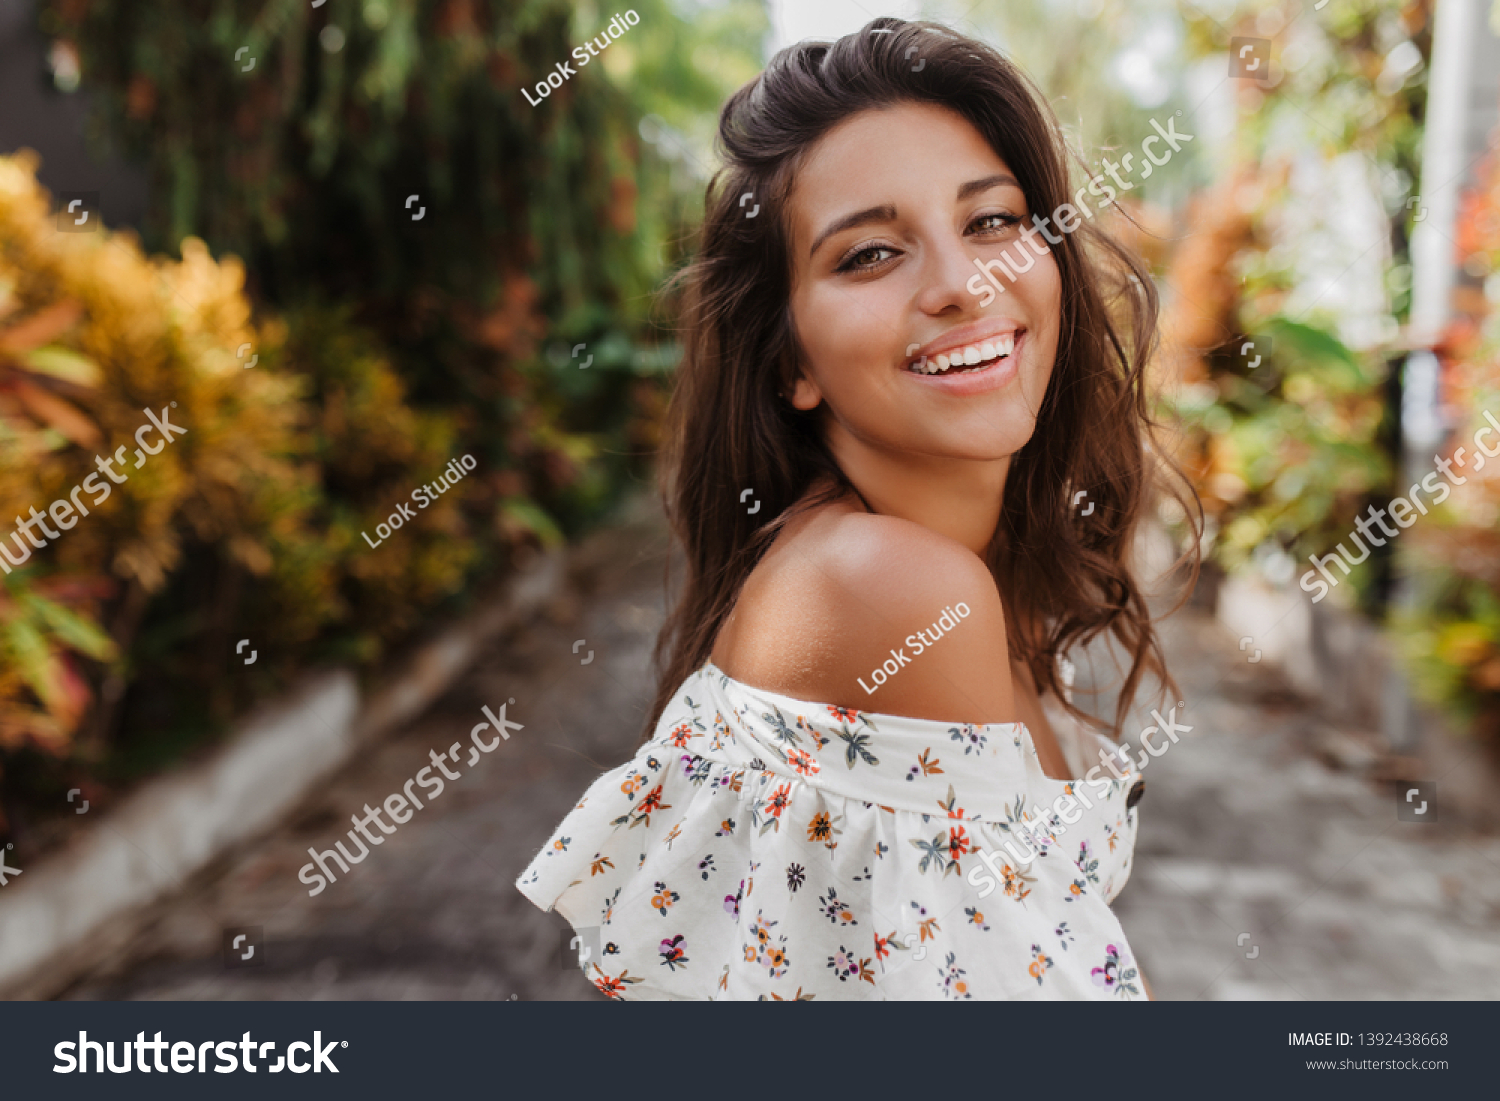 stock-photo-close-up-portrait-of-tanned-woman-on-rest-in-light-blouse-curly-dark-haired-girl-with-snow-white-1392438668.jpg